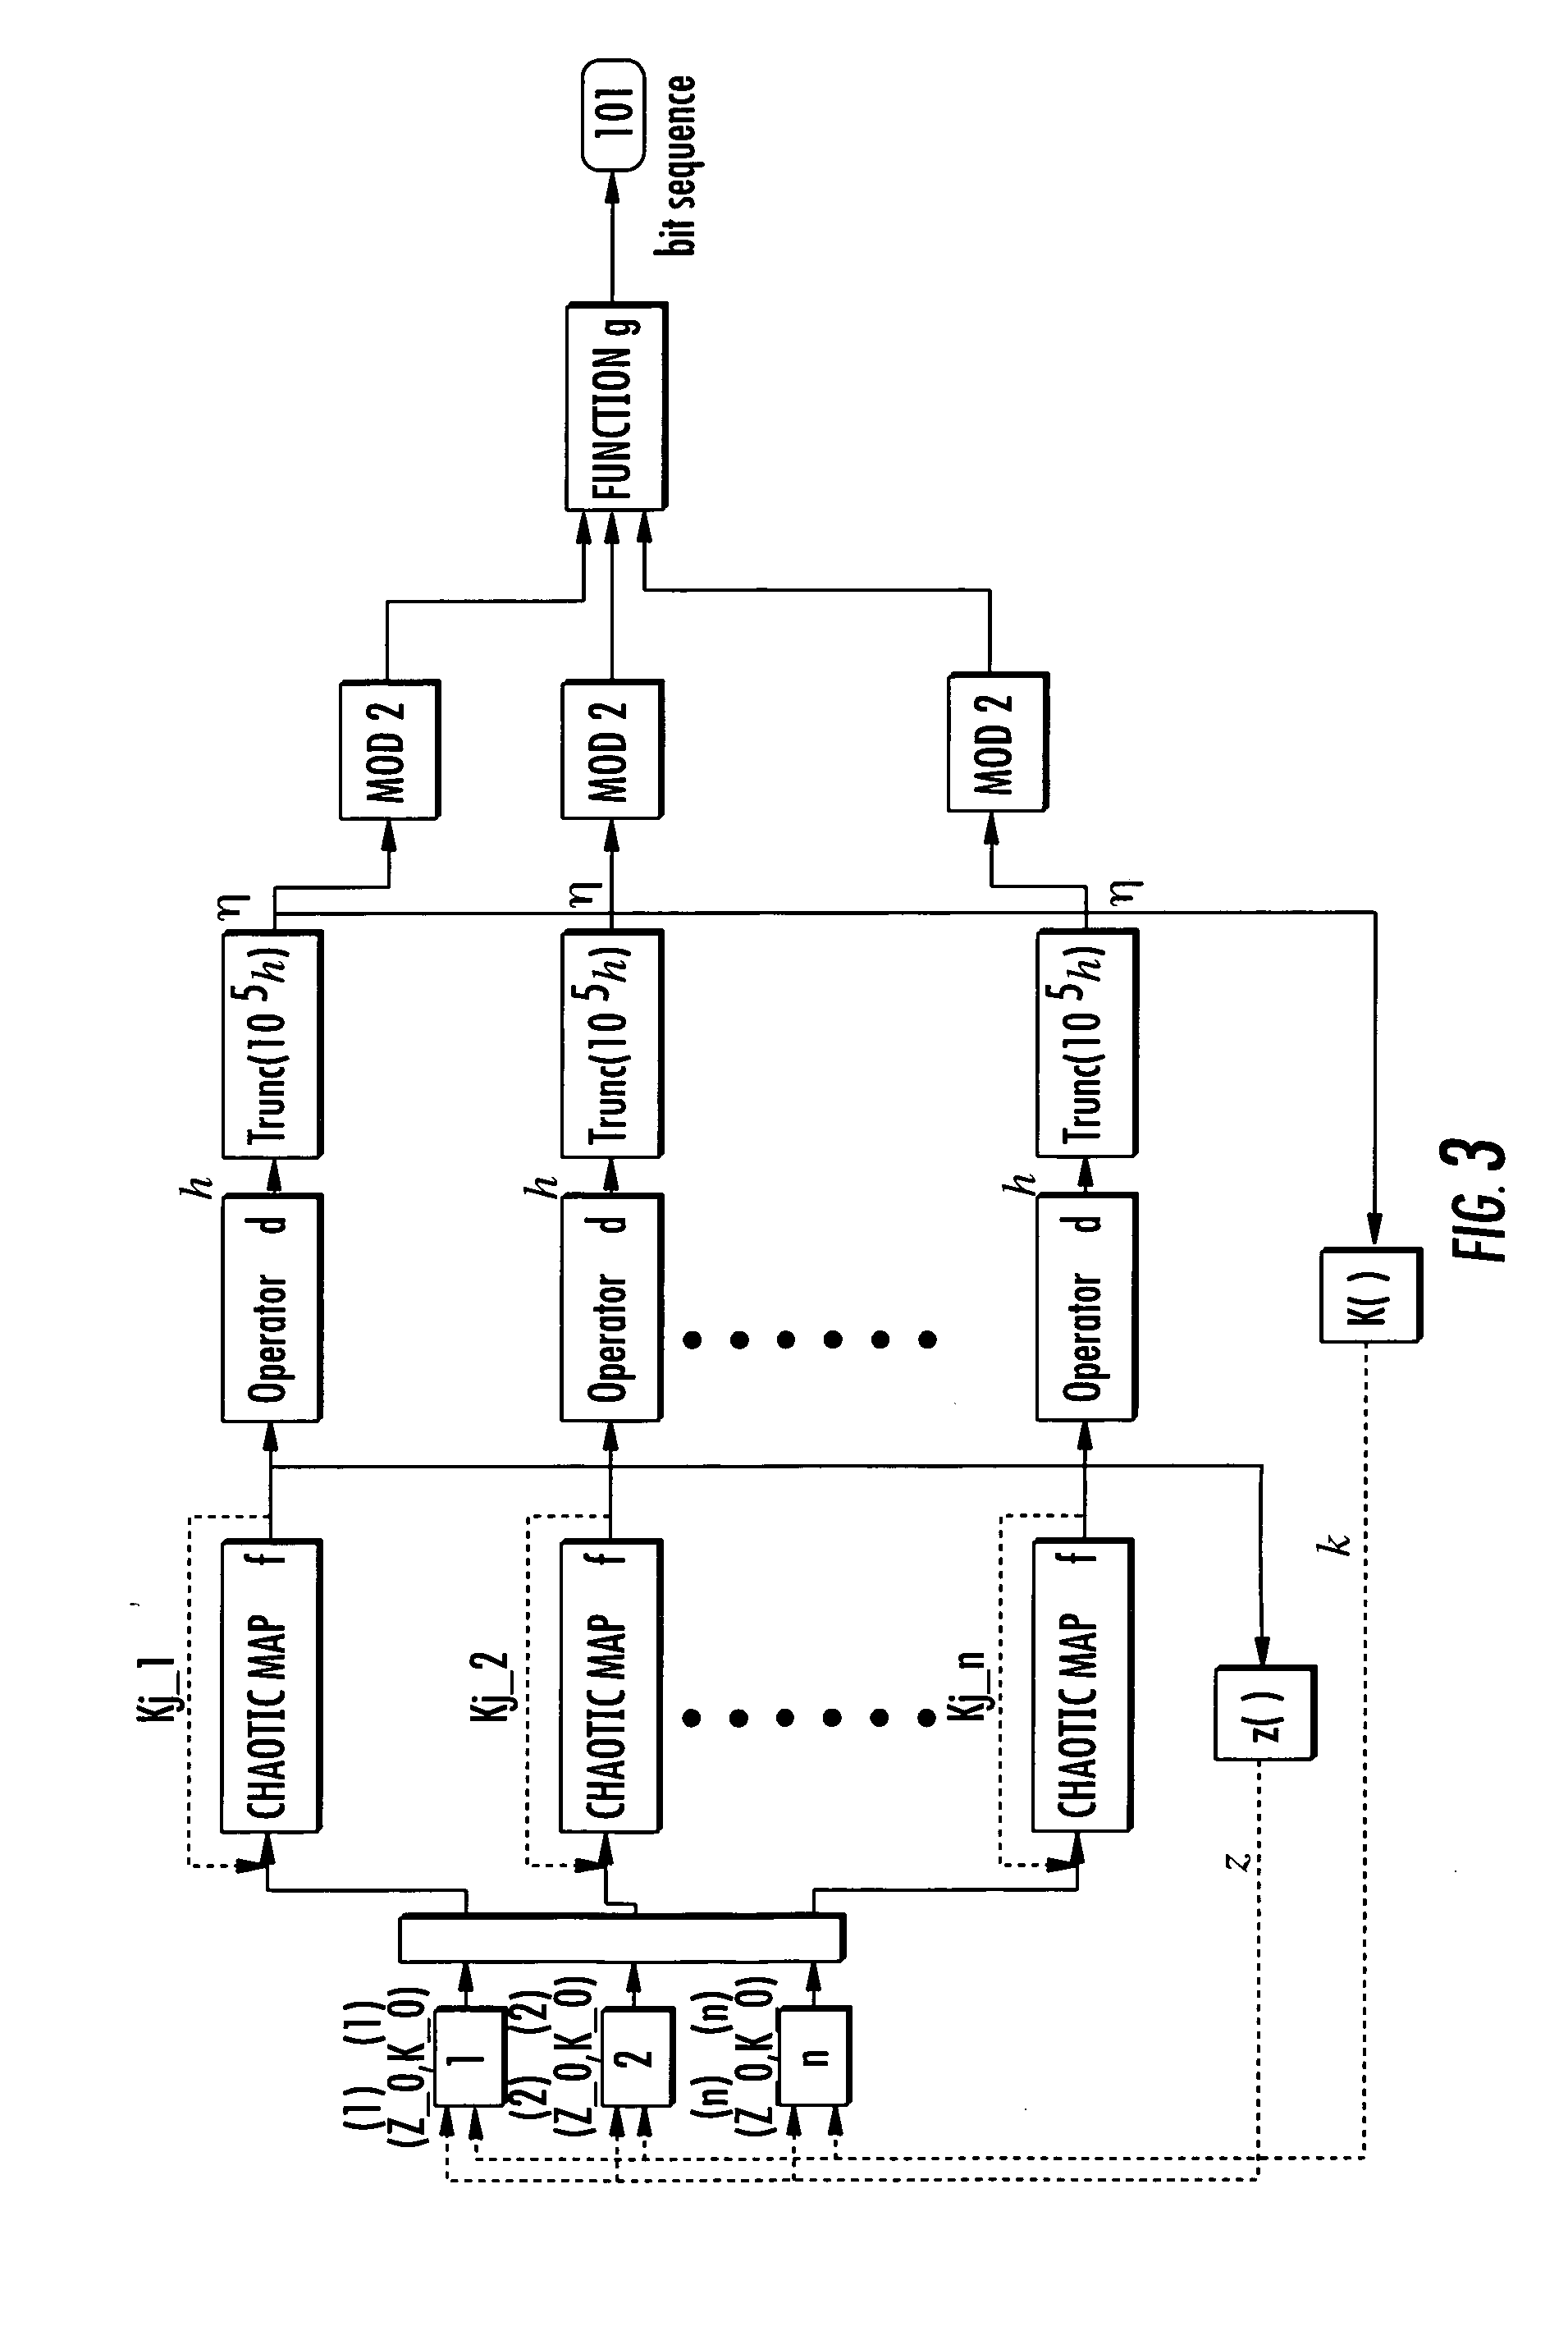 Method of generating successions of pseudo-random bits or numbers